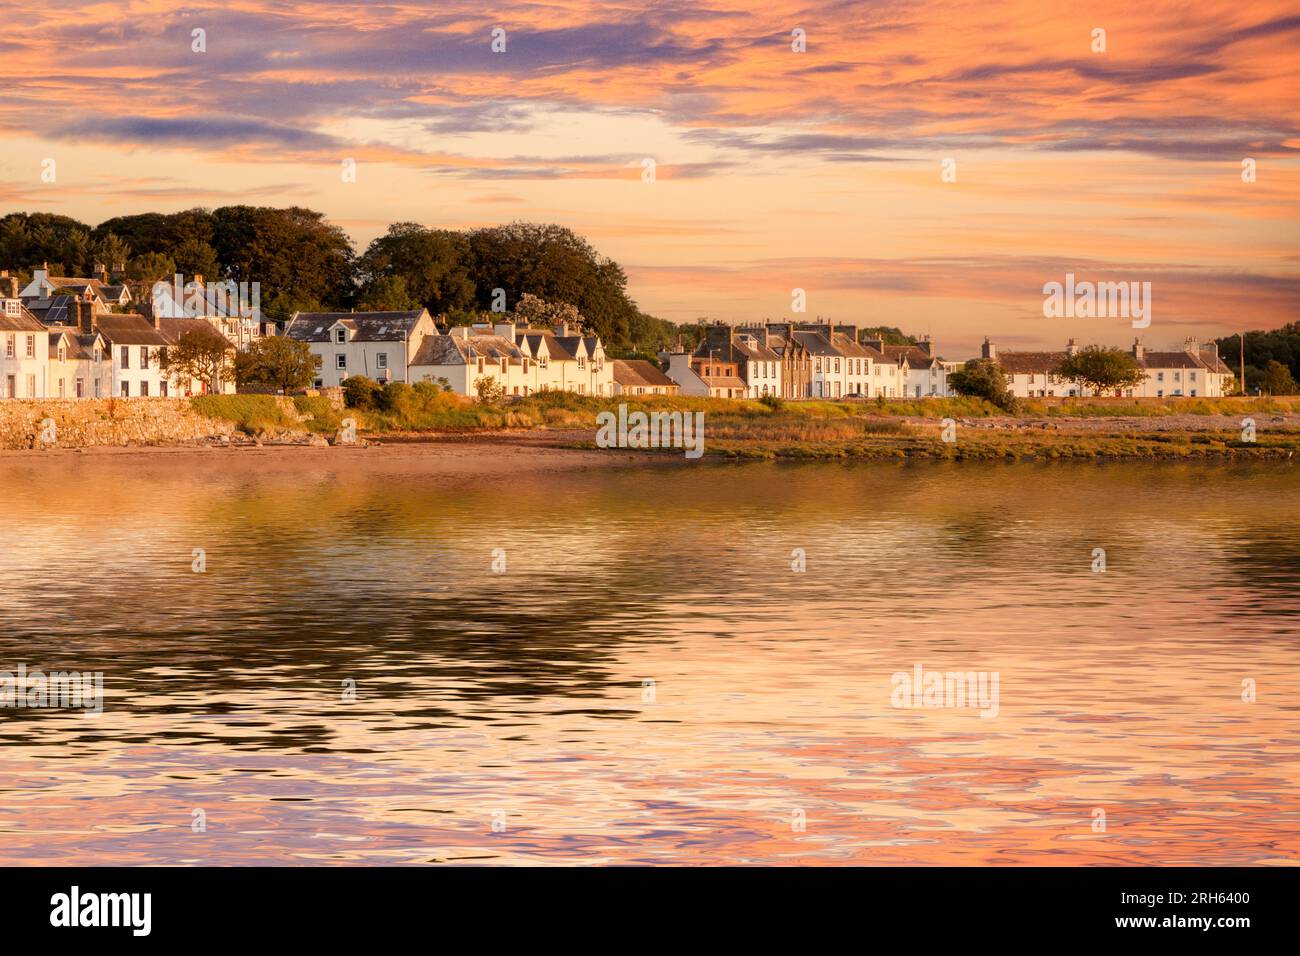 The Scottish village of Garlieston, Dumfries and Galloway, Scotland, UK, with an added colourful sky and reflection. Stock Photo